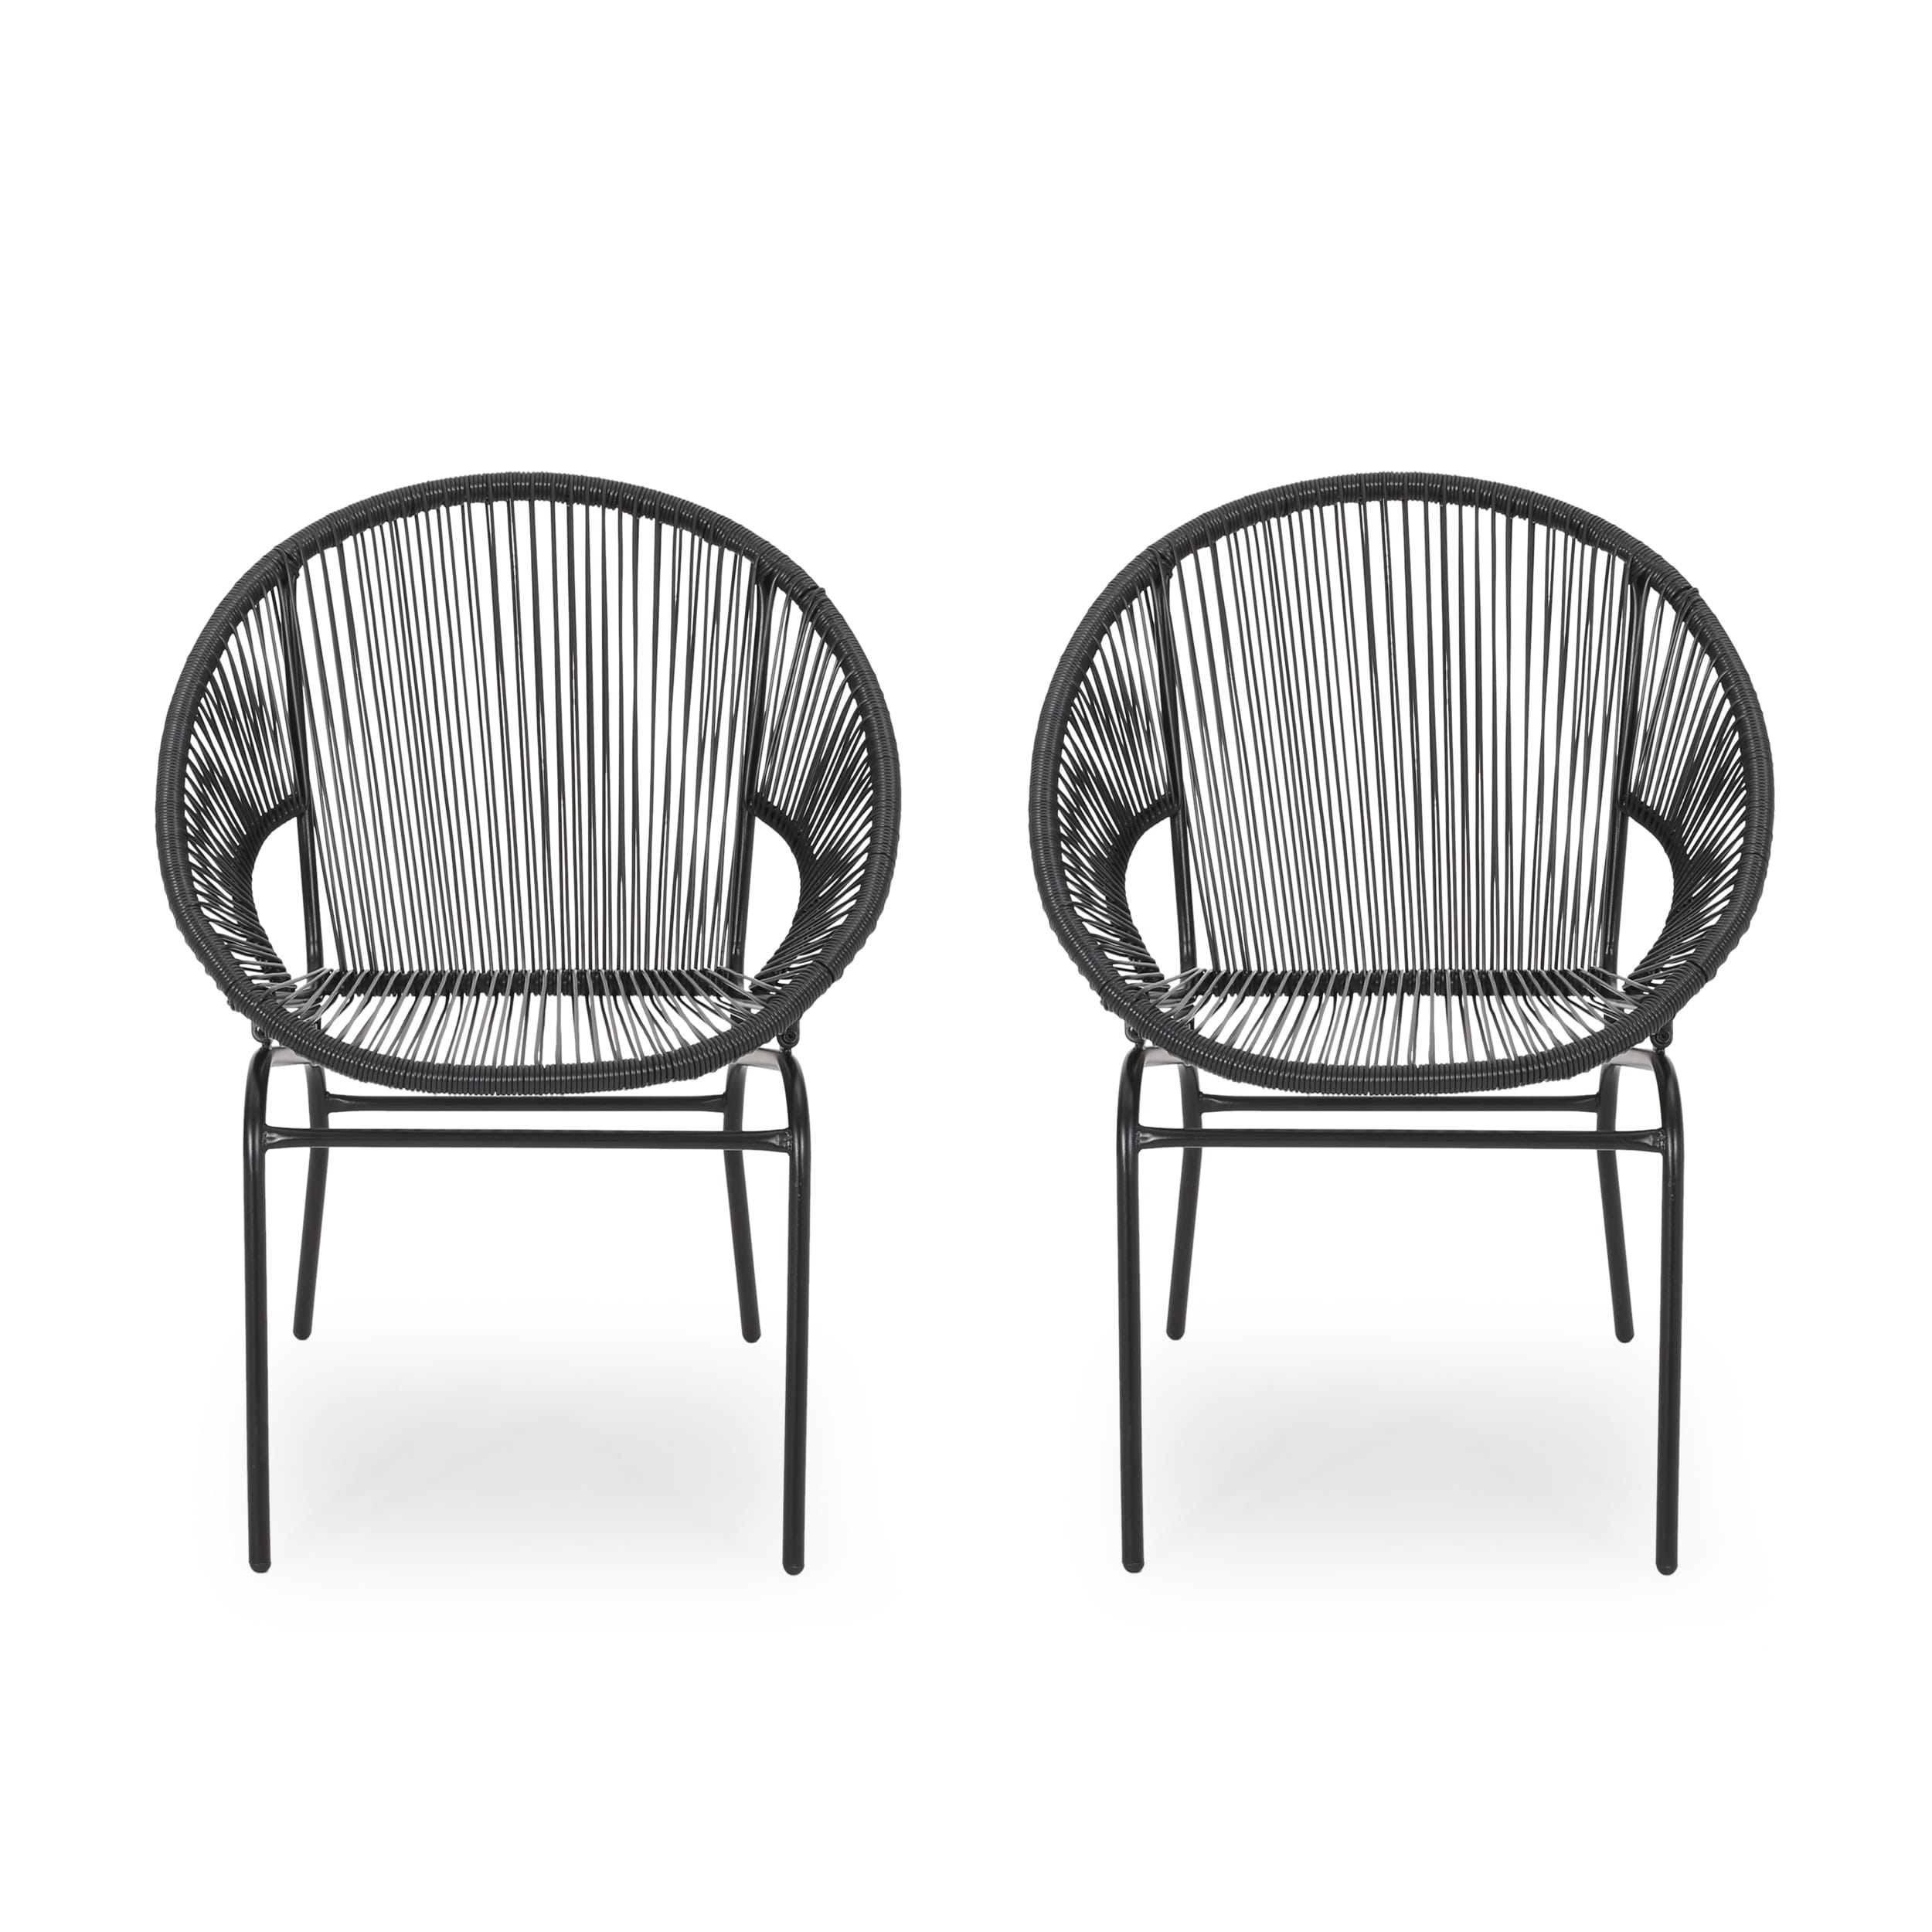 Nusa Outdoor Modern Wicker Club Chair (set Of 2) By Christopher Knight Home